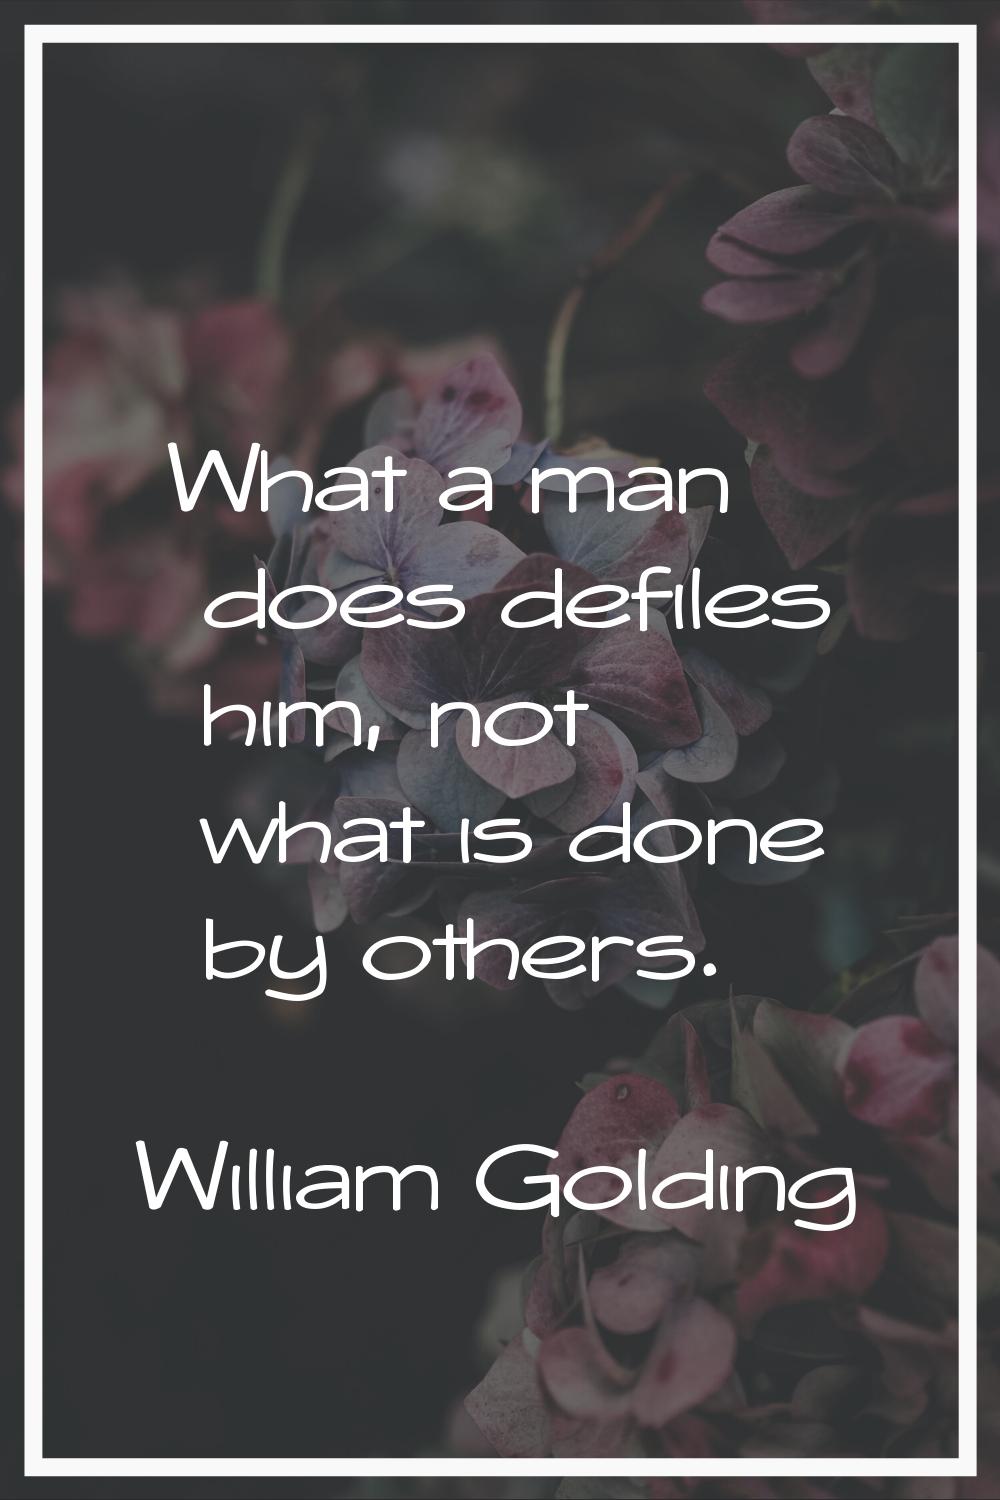 What a man does defiles him, not what is done by others.